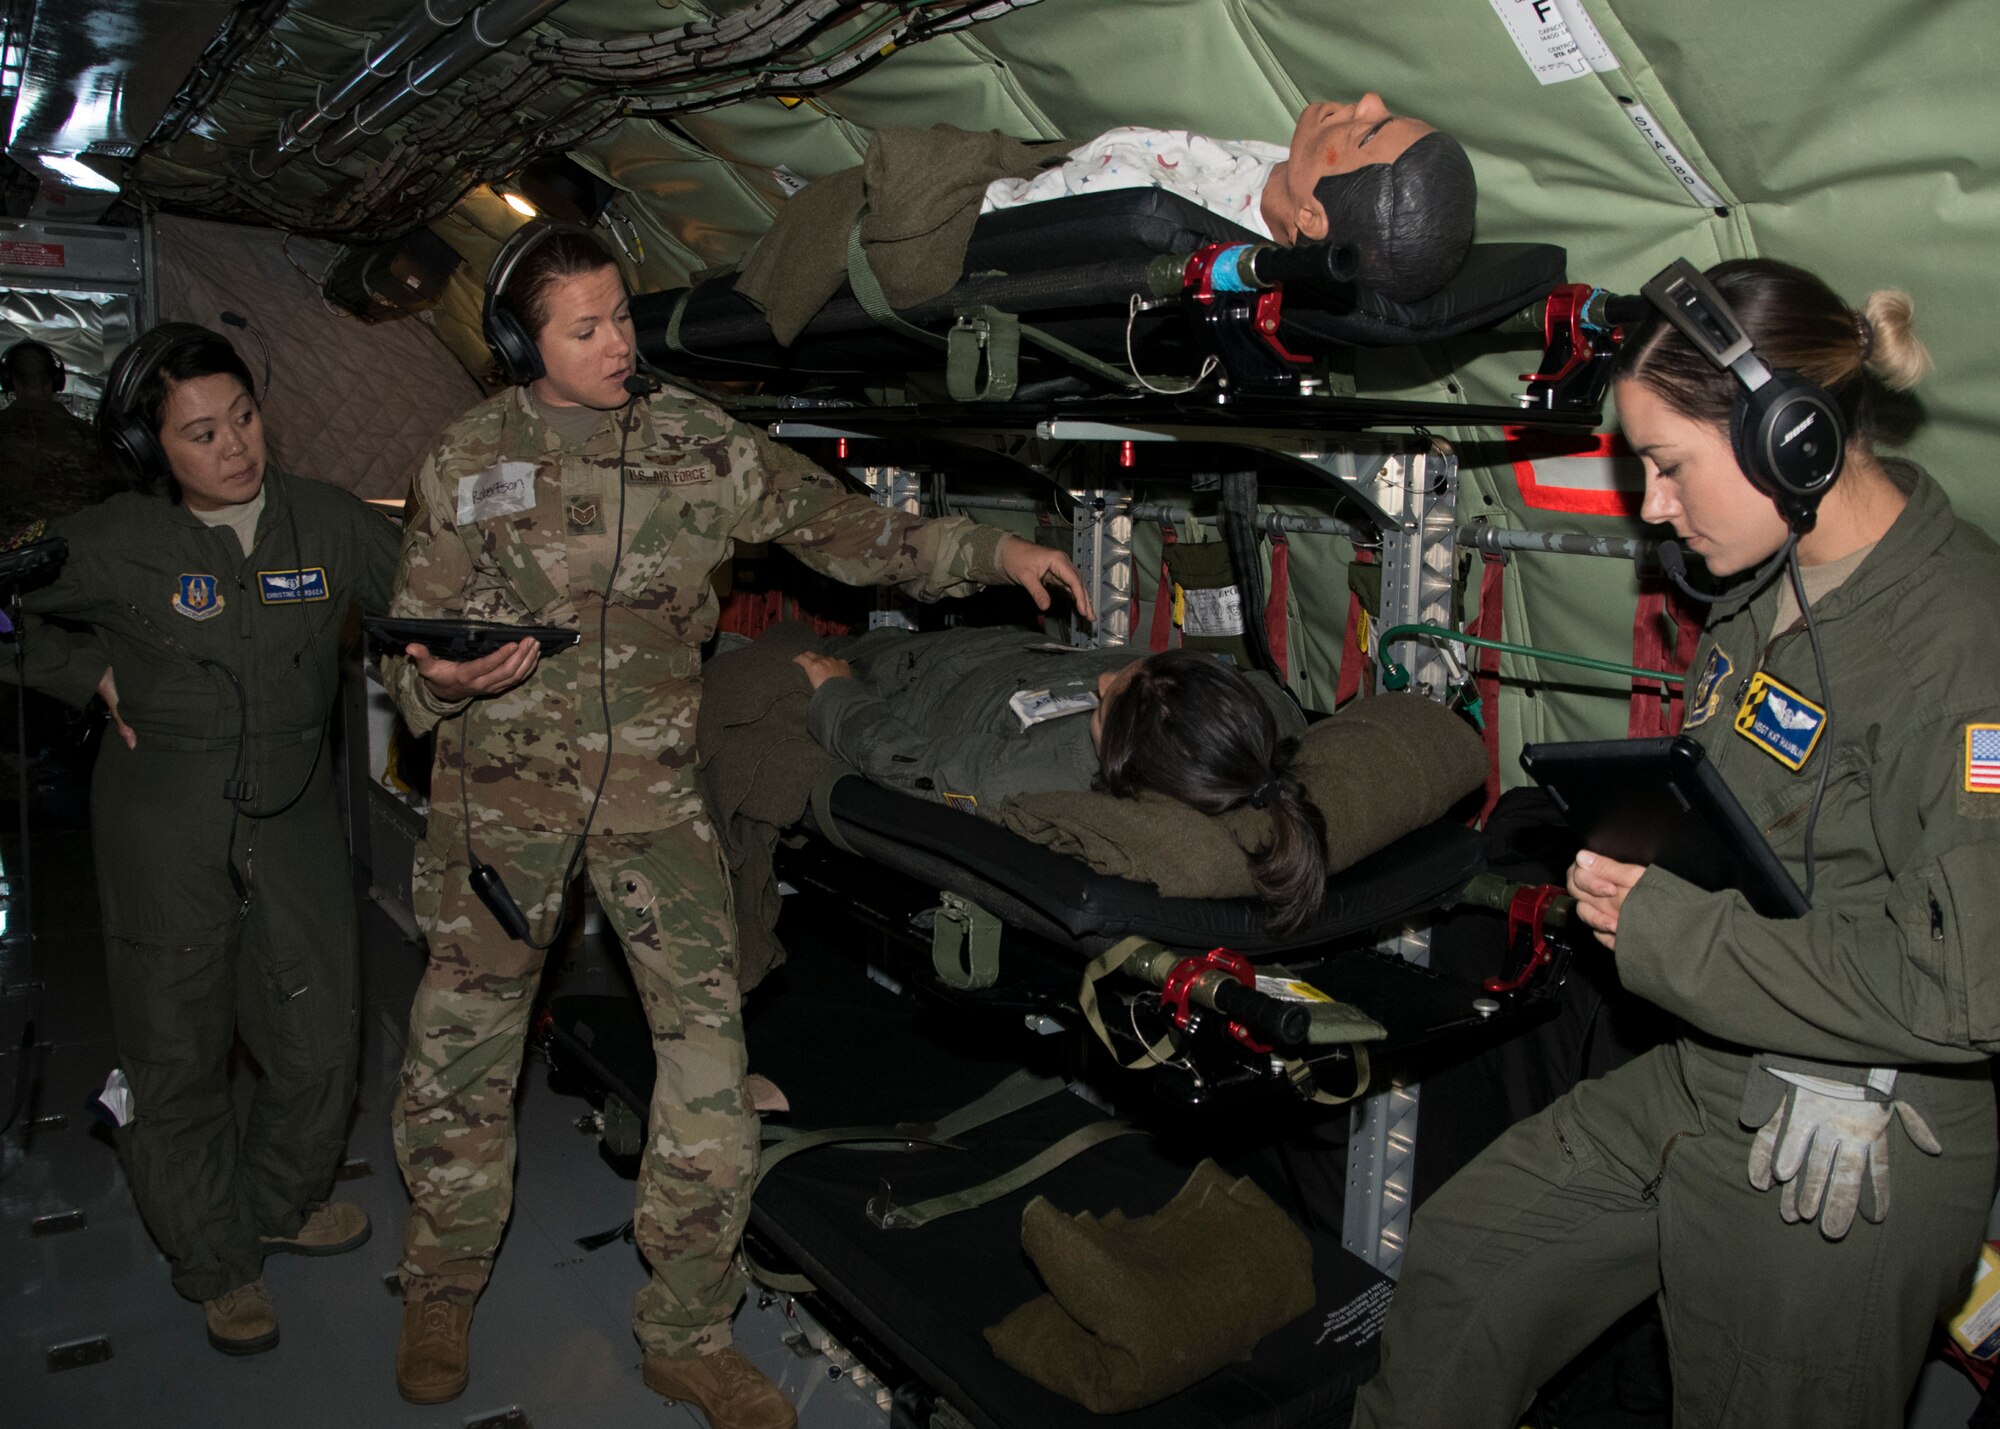 Staff Sgt. Sarah Loudon, 459th Aeromedical Evacuation Squadron flight medic, explains an abdominal medical issue that can occur in-flight to her team during an off station trainer on a KC-135 Stratotanker, Sept. 20, 2019. The team participates in local and off station training missions about twice a month to ensure humanitarian and deployment mission readiness. (U.S. Air Force photo by Staff Sgt. Cierra Presentado/Released)